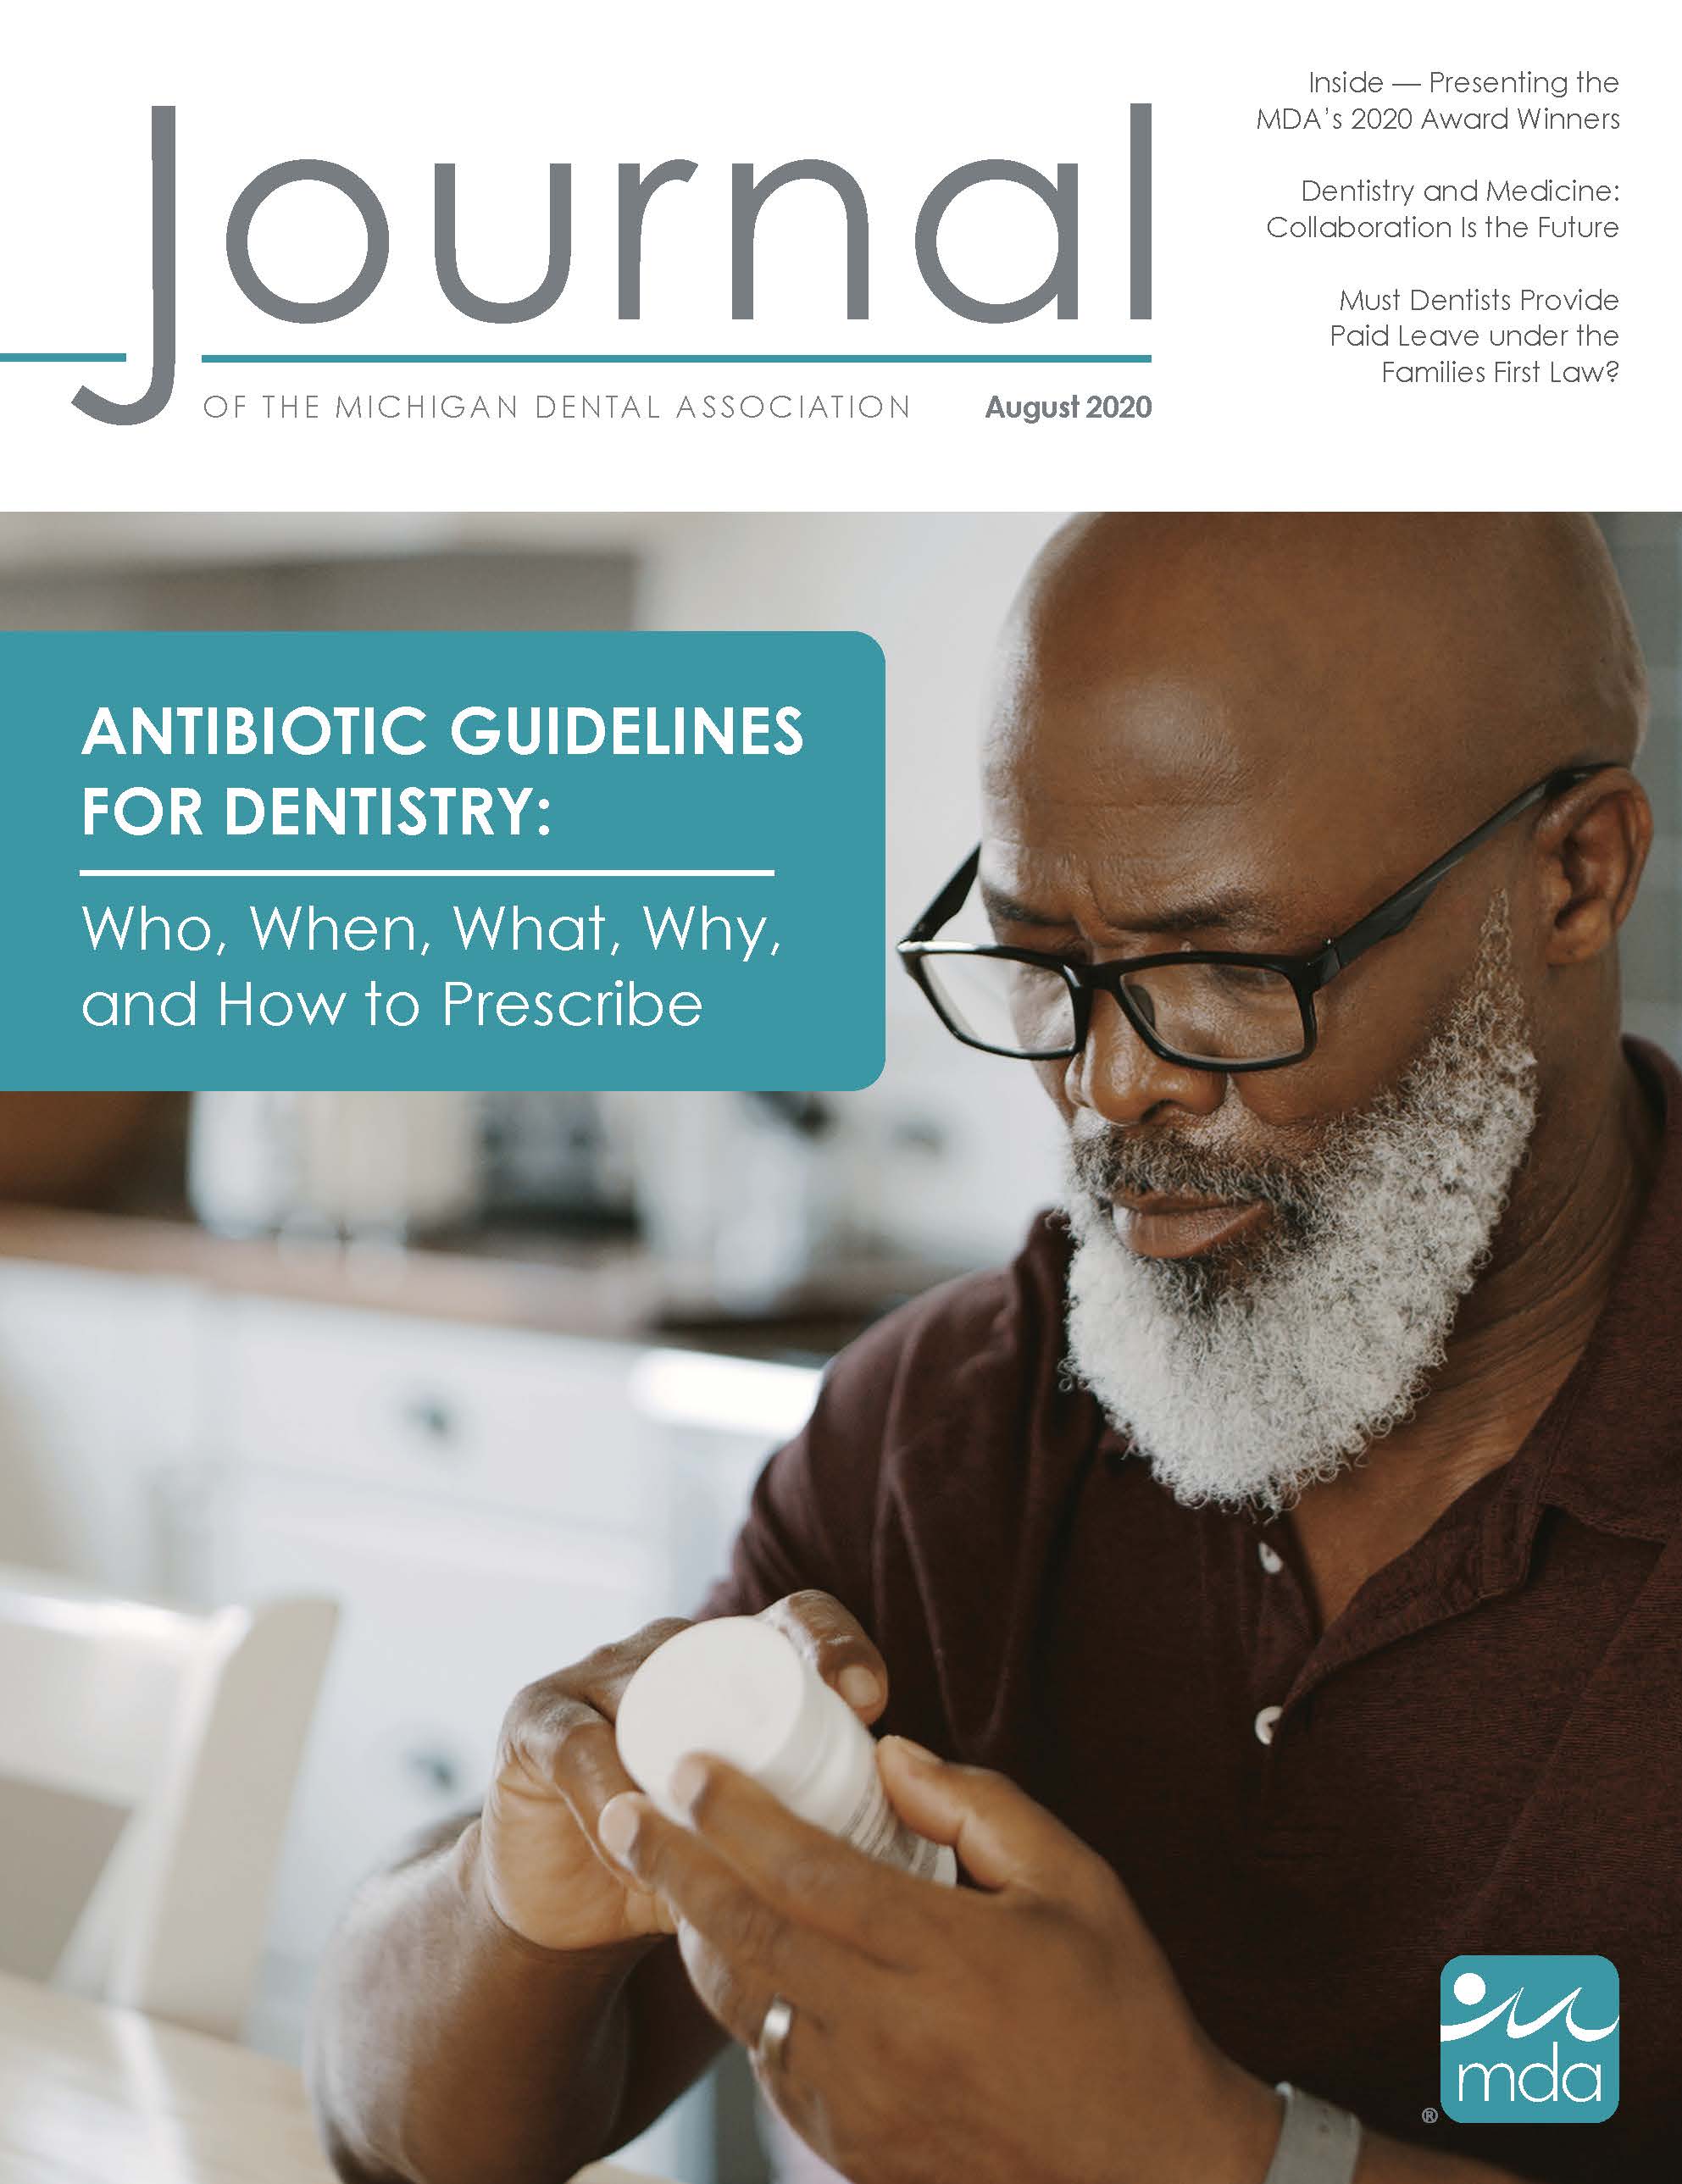 Cover of the Journal of the Michigan Dental Association with a man reading a pill bottle.